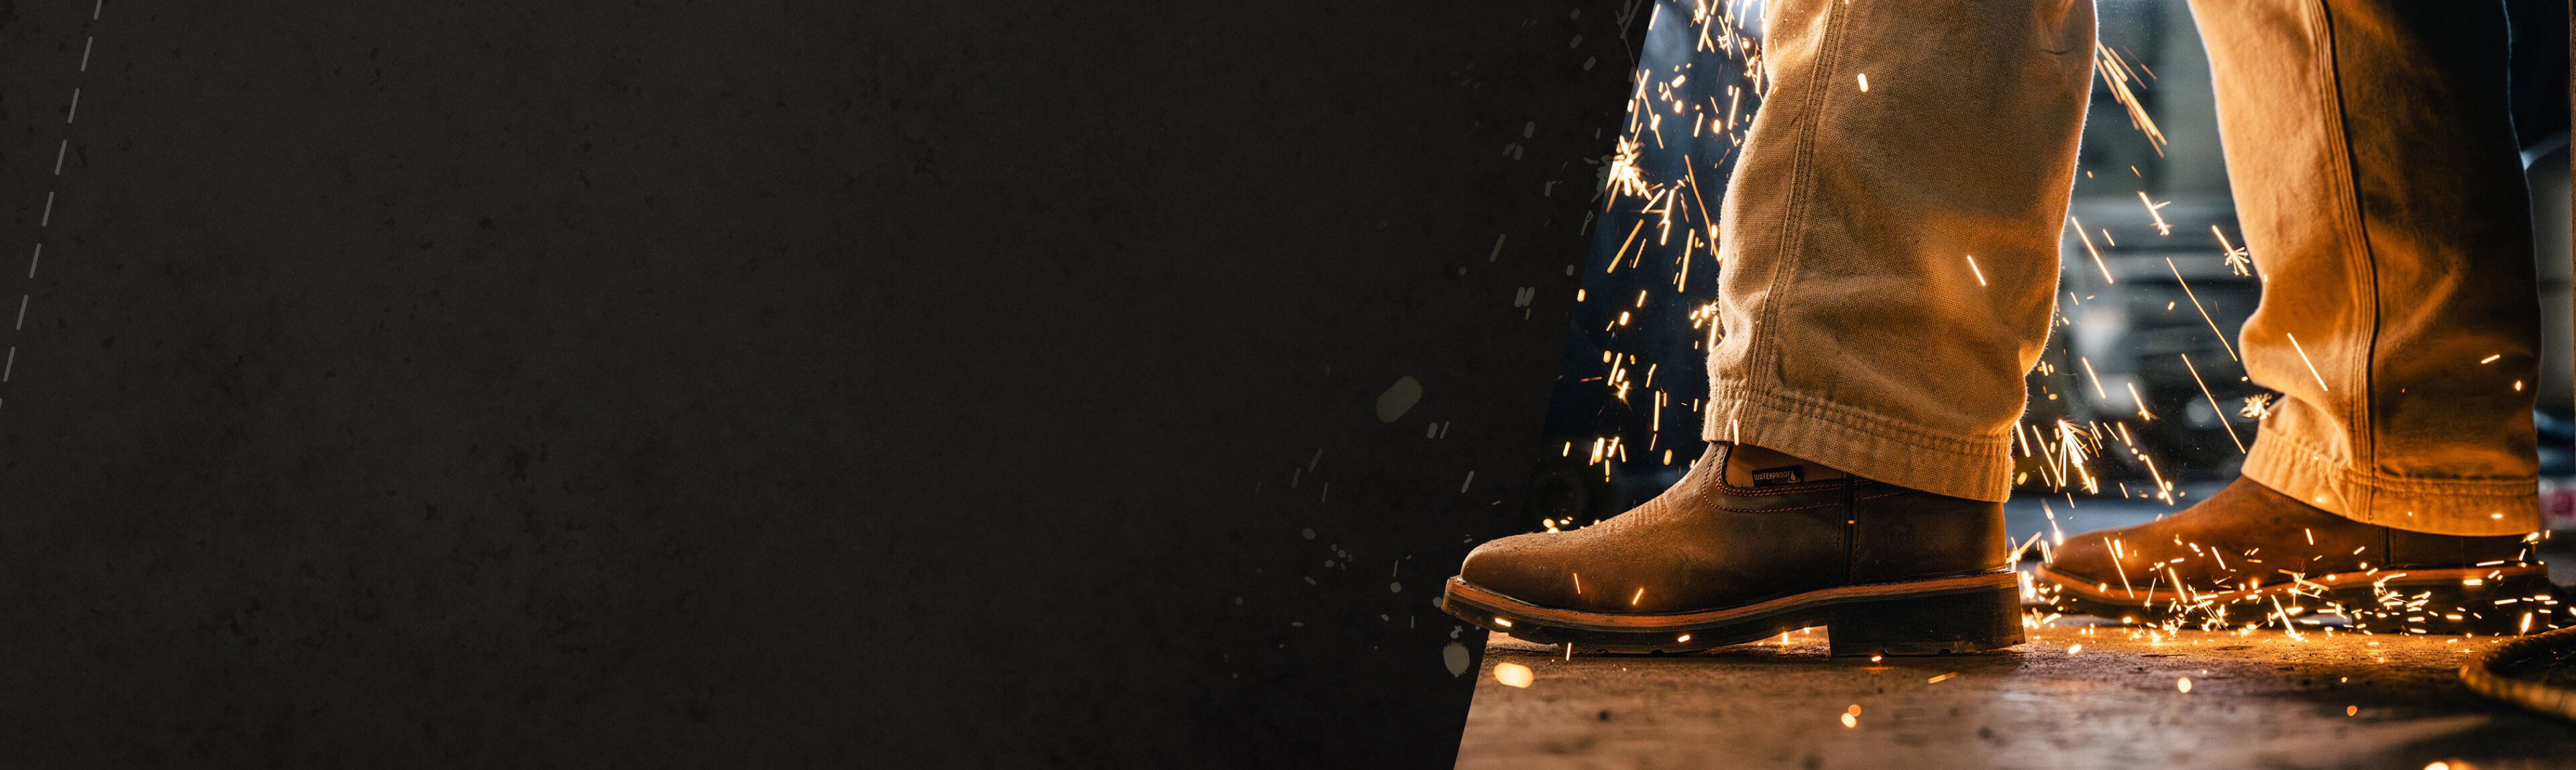 a person's foot with sparks flying from the top